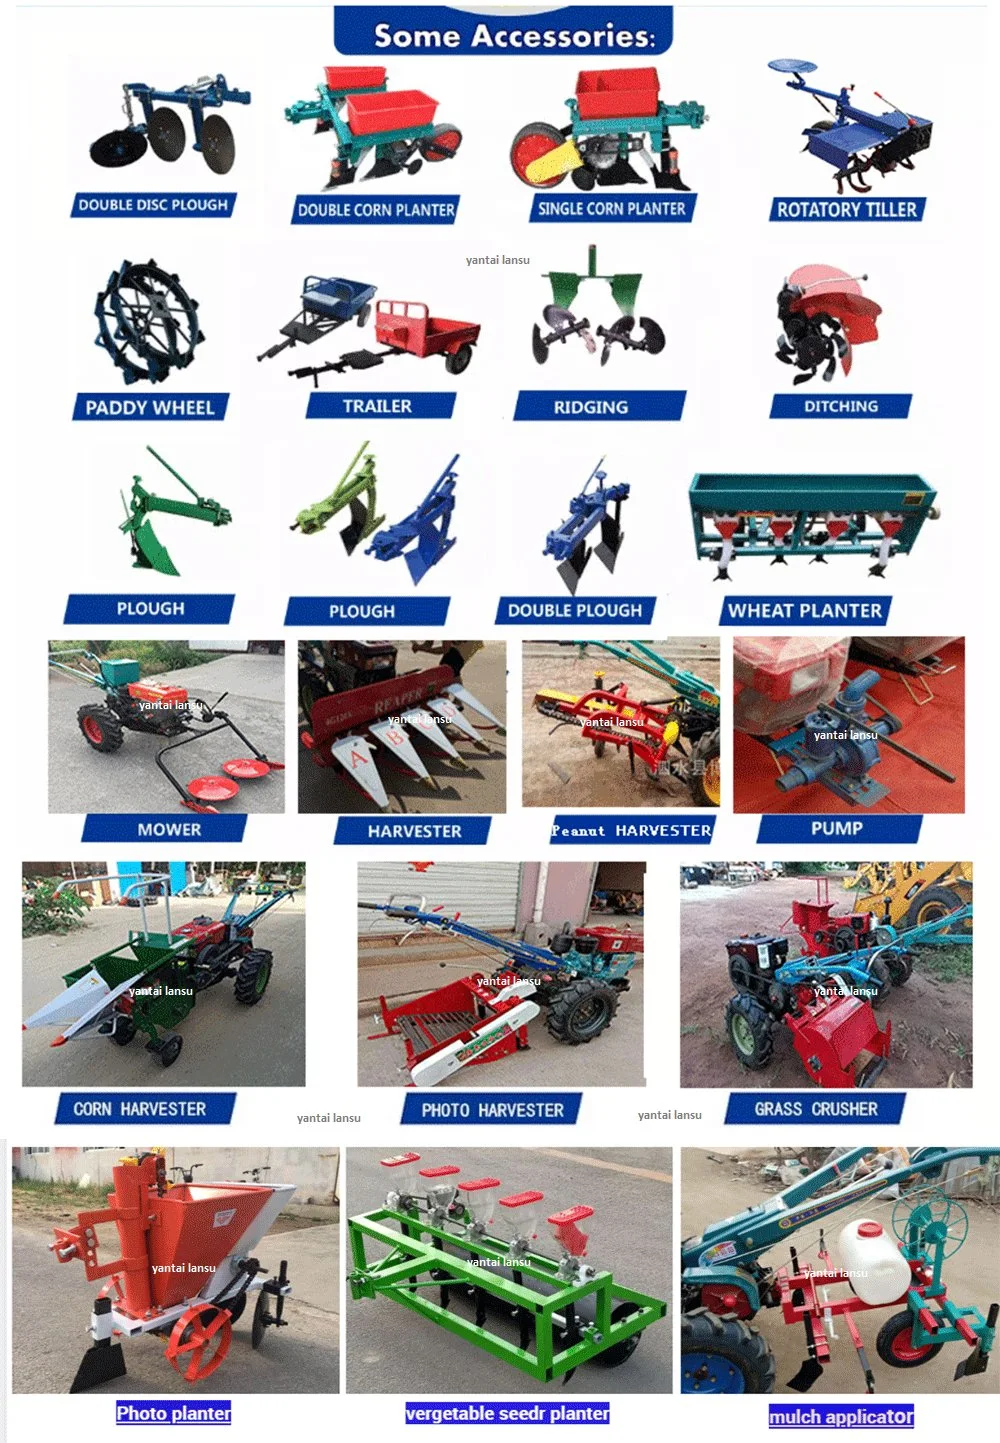 2 Wheel Walking Tractor High Quality on Sale